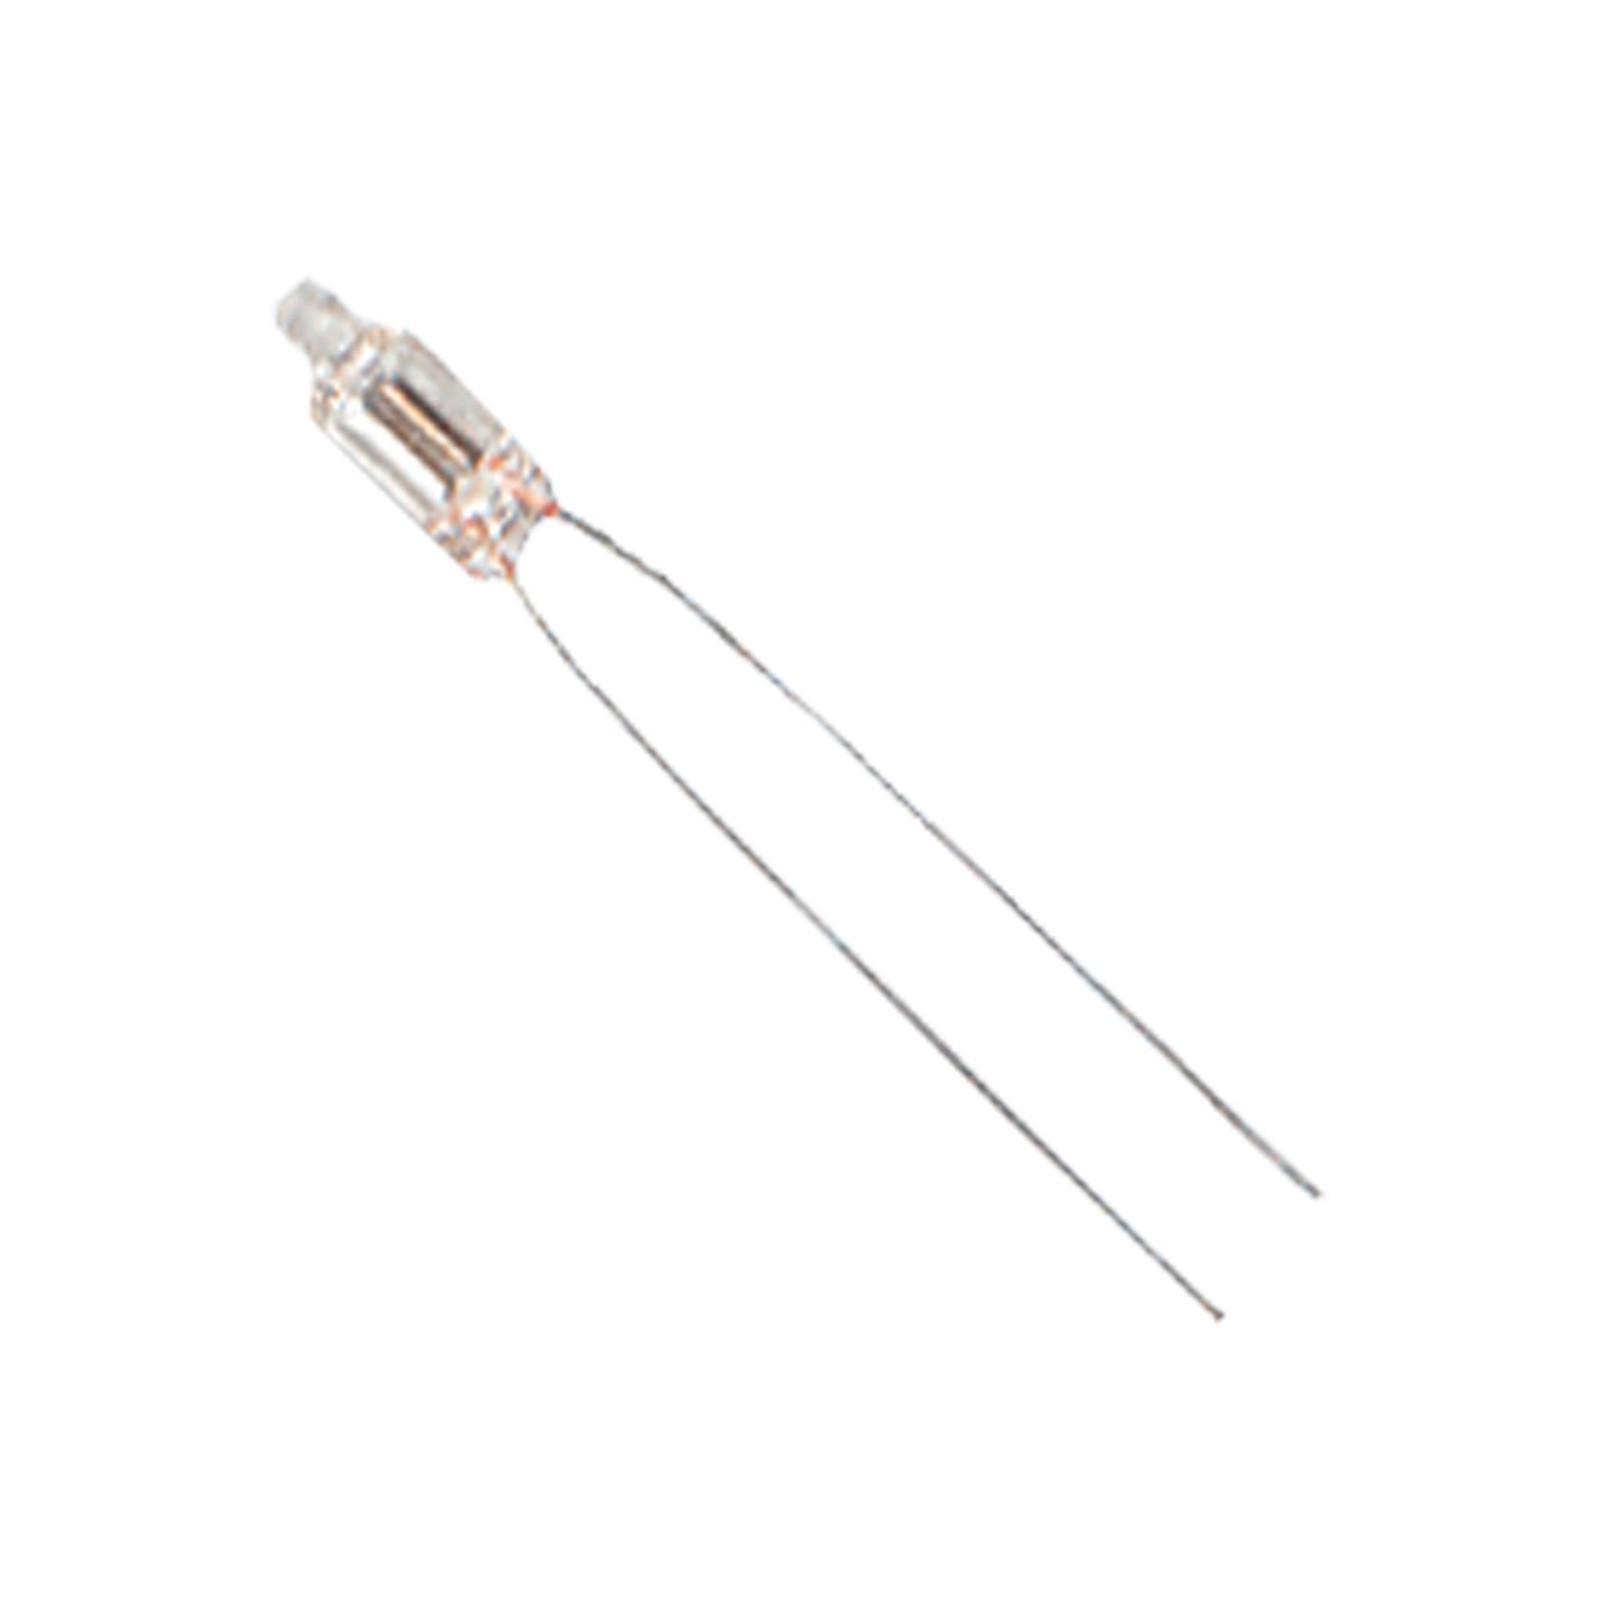 Cml Innovative Technologies 1Mh Neon Lamp, Wire Ended, T1.1/4